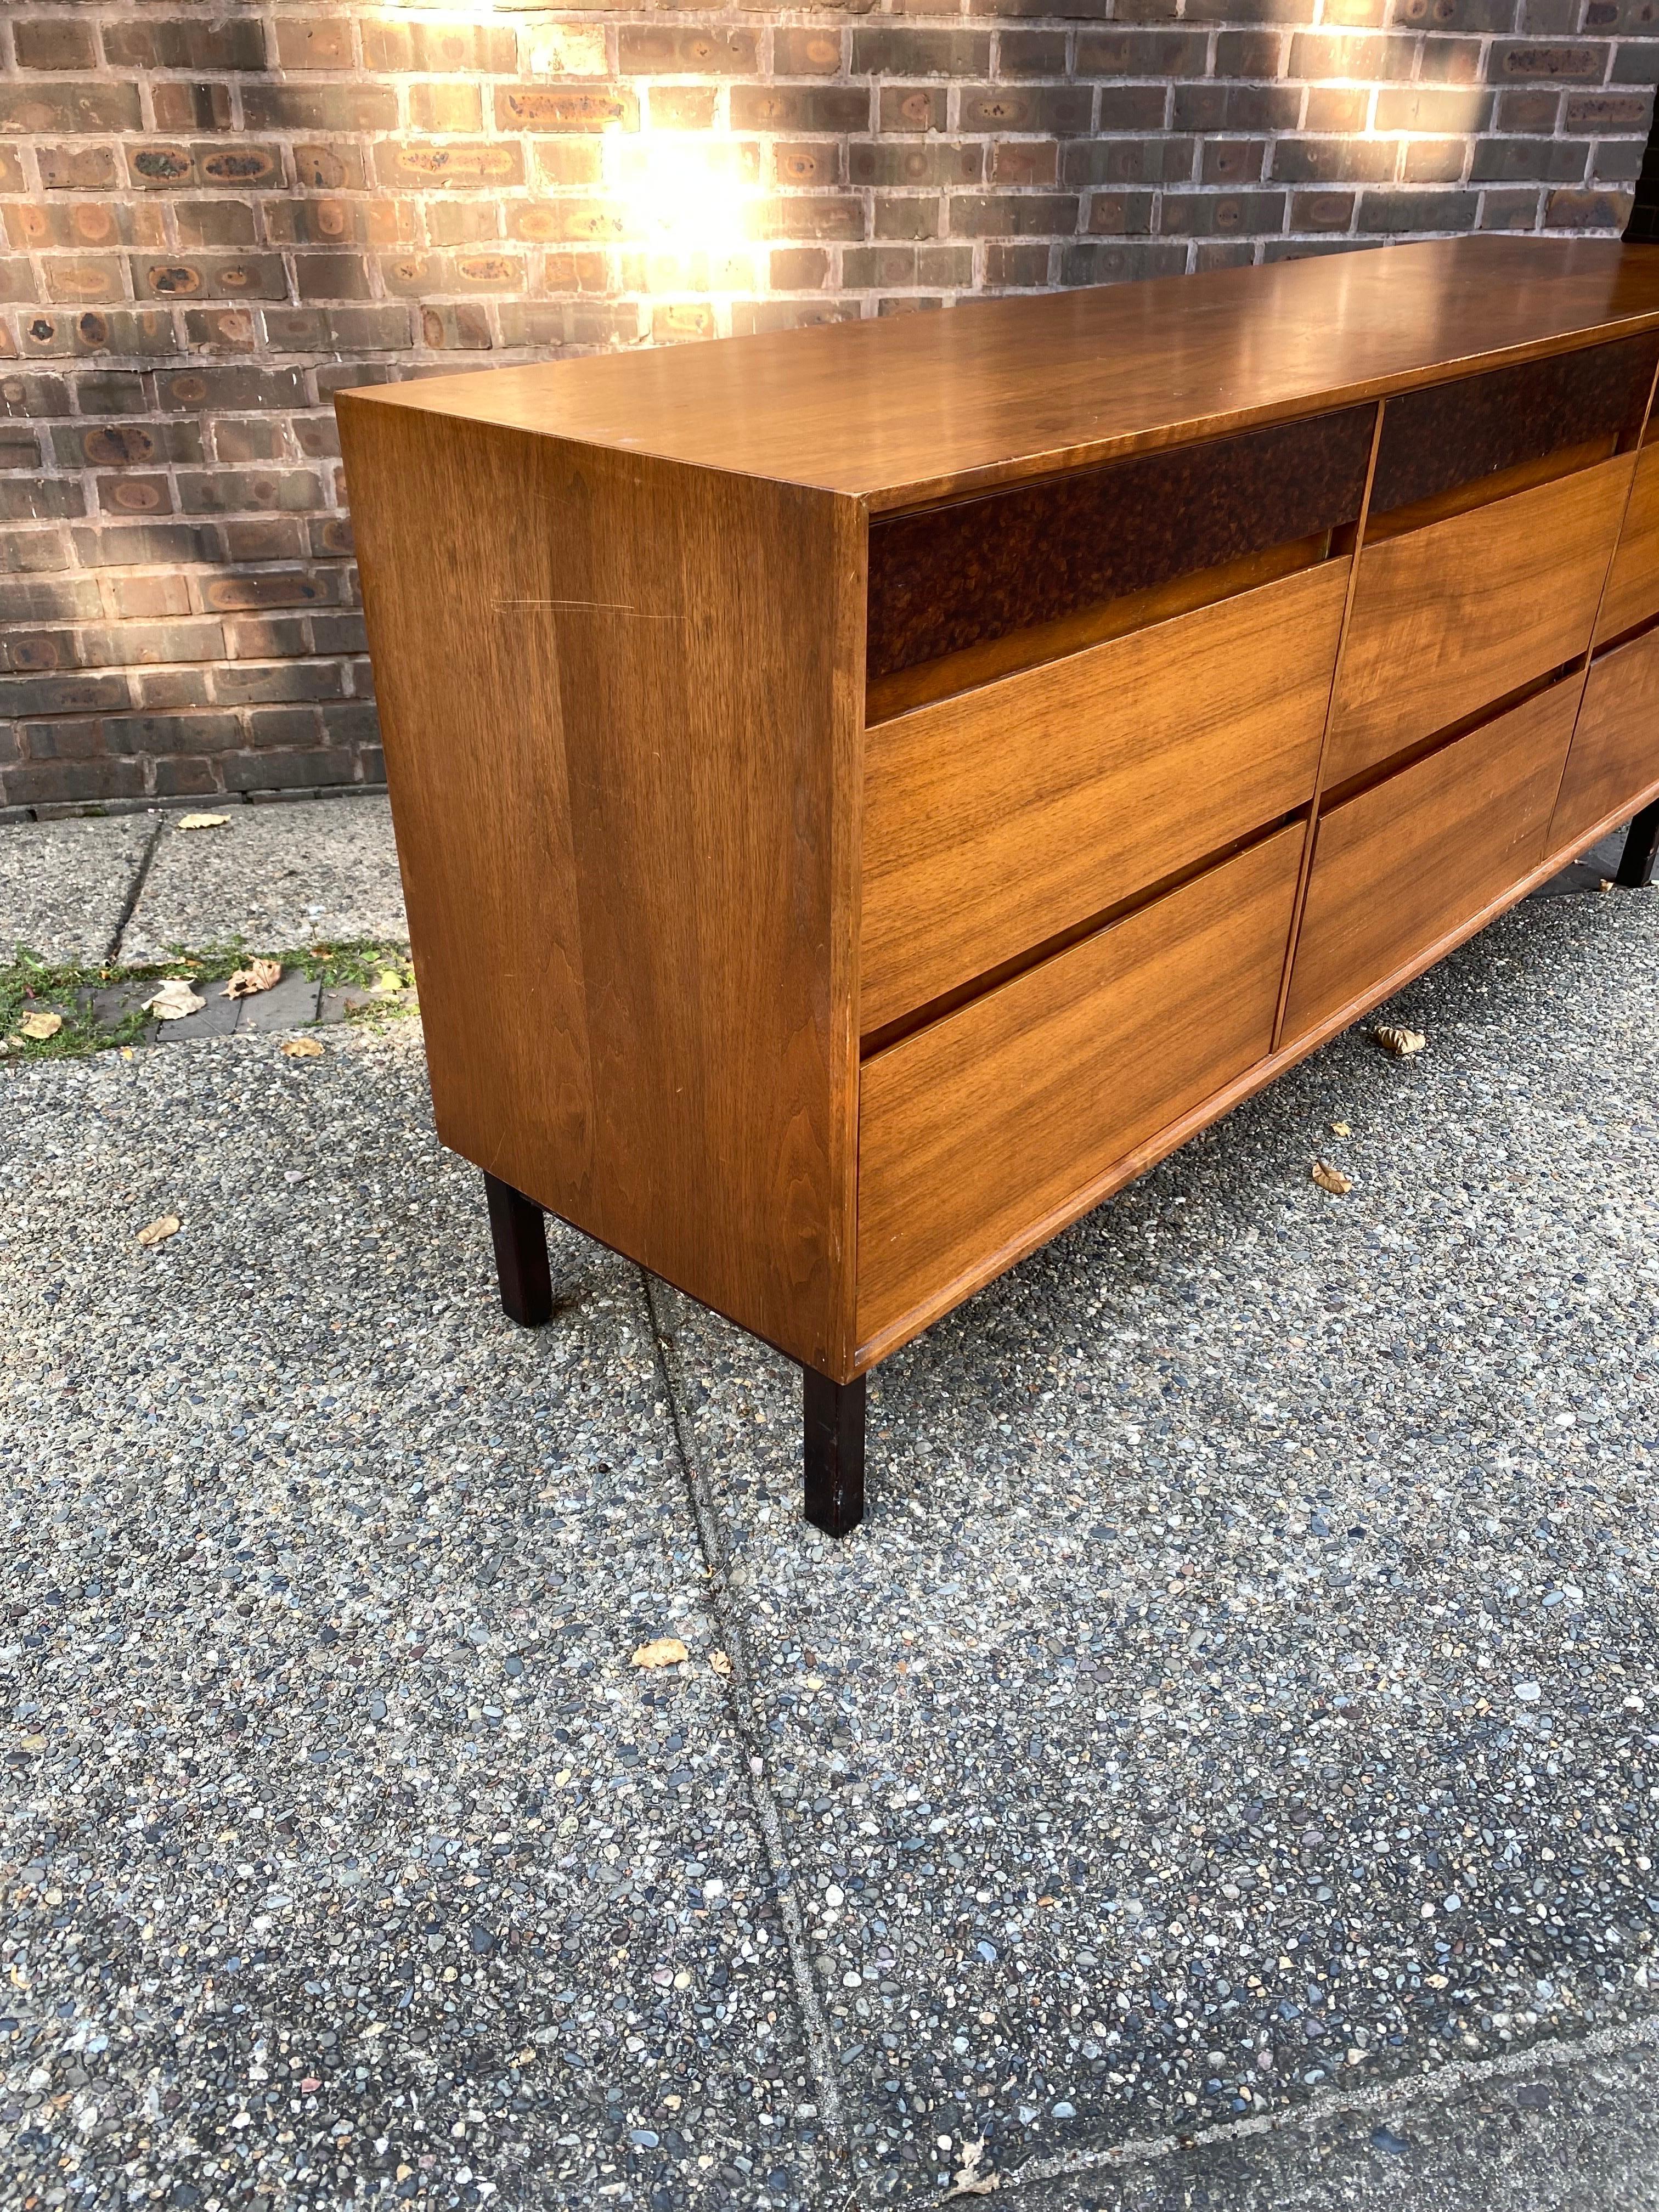 Mount Airy Furniture Company 9 Drawer Dresser.  Dark Burled Fronts to top three Drawers.  Handsome and extremely well-made Dresser.  Matching Desk and Nightstand Available in separate listings.  Original Finish looks very good with just minimal wear.